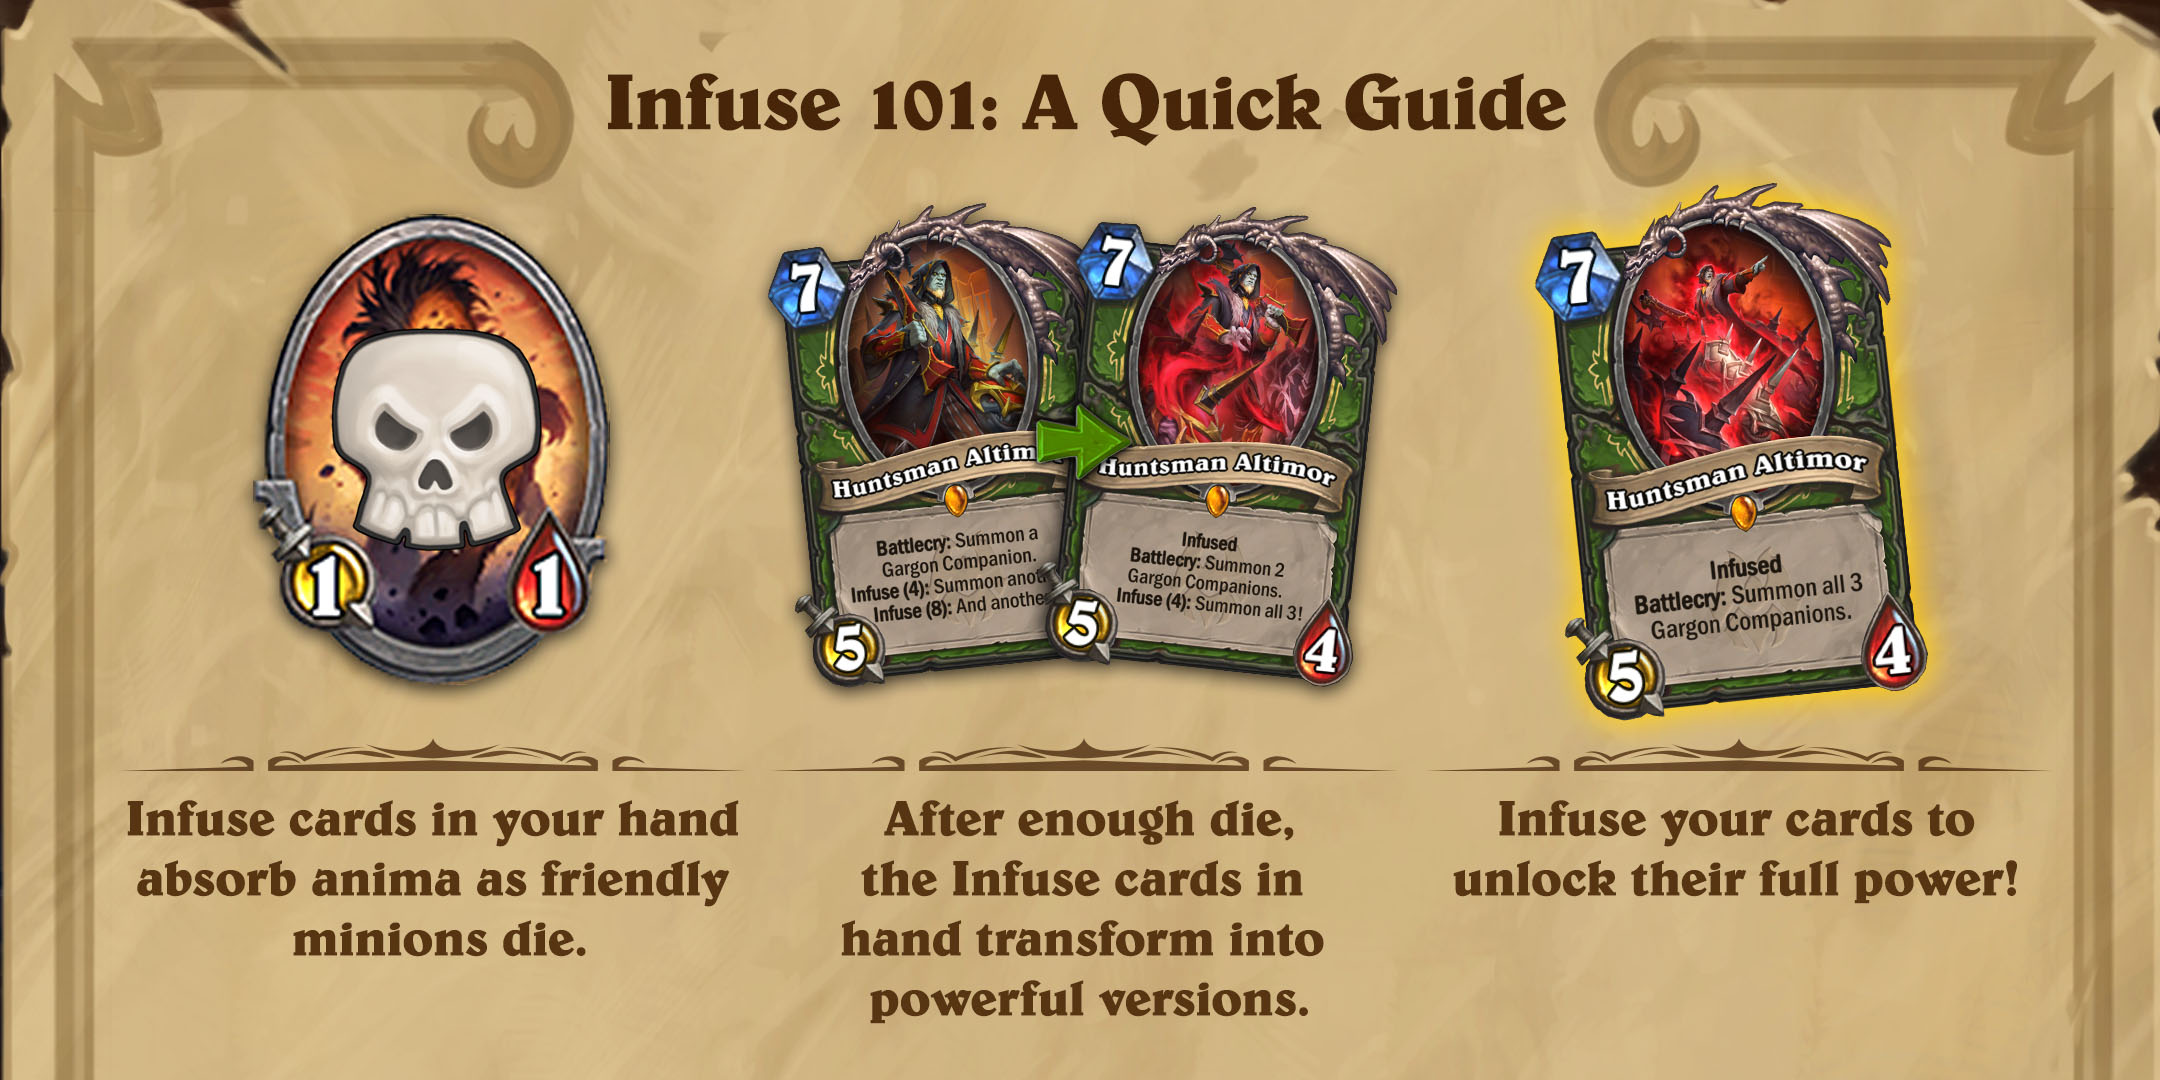 Graphic shows a quick guide to Infusions. First, infuse cards in your hand absorb anima as friendly minions die. After enough die, Infuse cards in hand transform into powerful versions (Image shows Huntsman transforming to show new, spookier artwork), Infuse your cards to unlock their full power. Final Huntsman transformation shows the Huntsman surrounded by eerie red energy and large protruding spikes from his Gorgon’s armor while he points forward toward the battle.